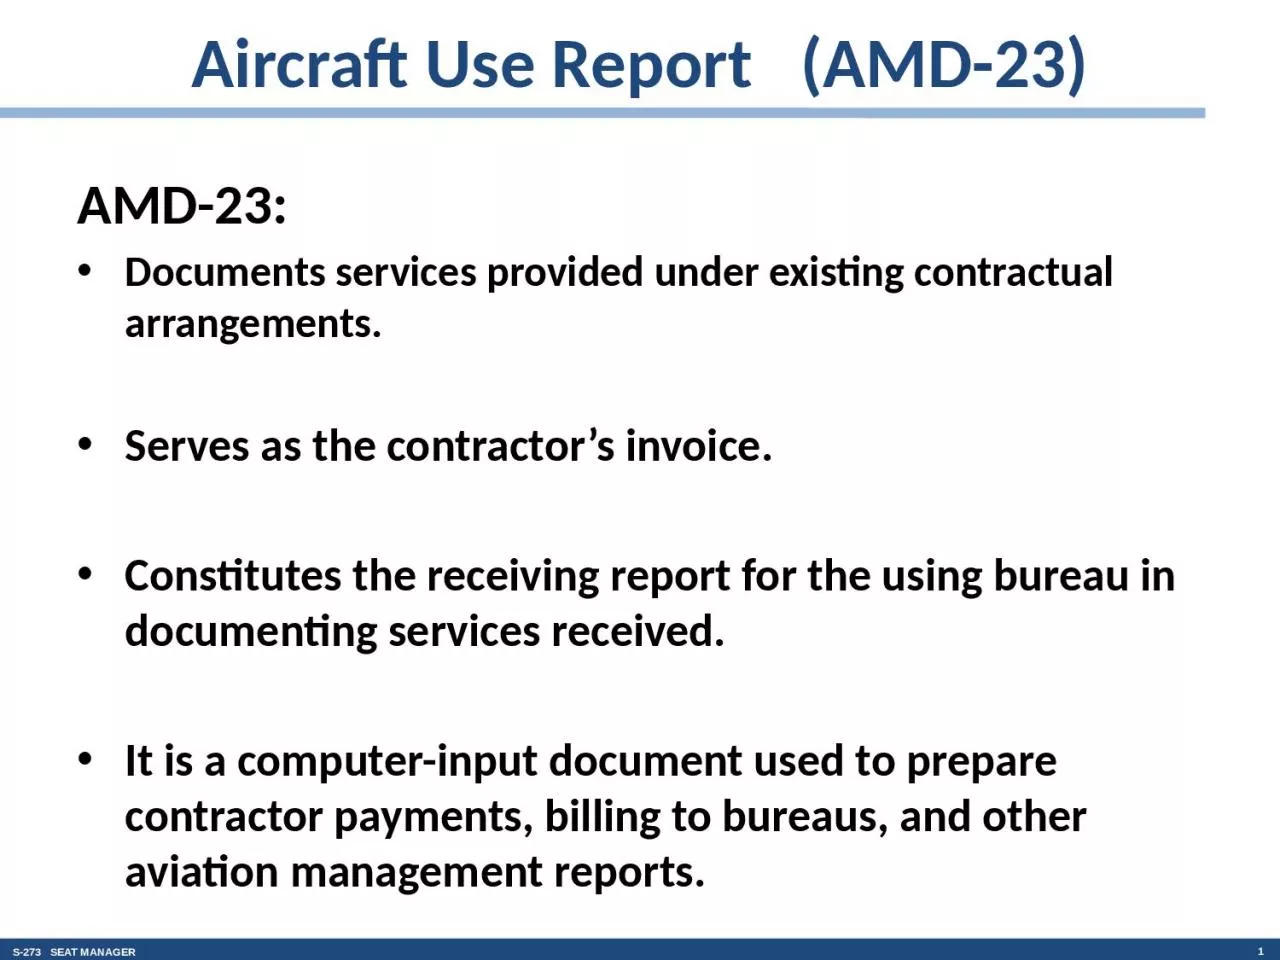 AMD-23: Documents services provided under existing contractual arrangements.